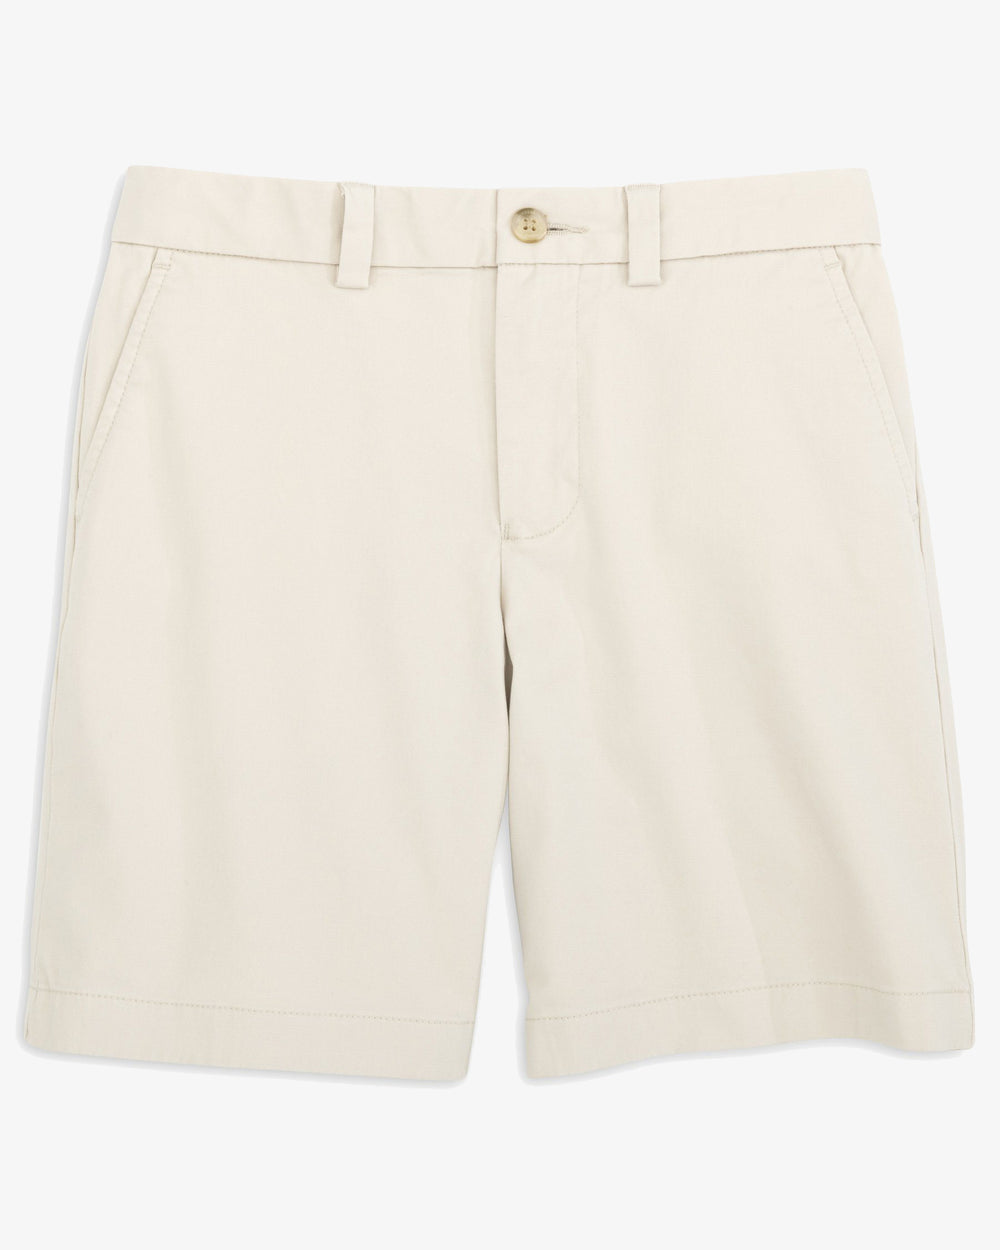 The front view of the Boys Channel Marker Short by Southern Tide - Light Khaki